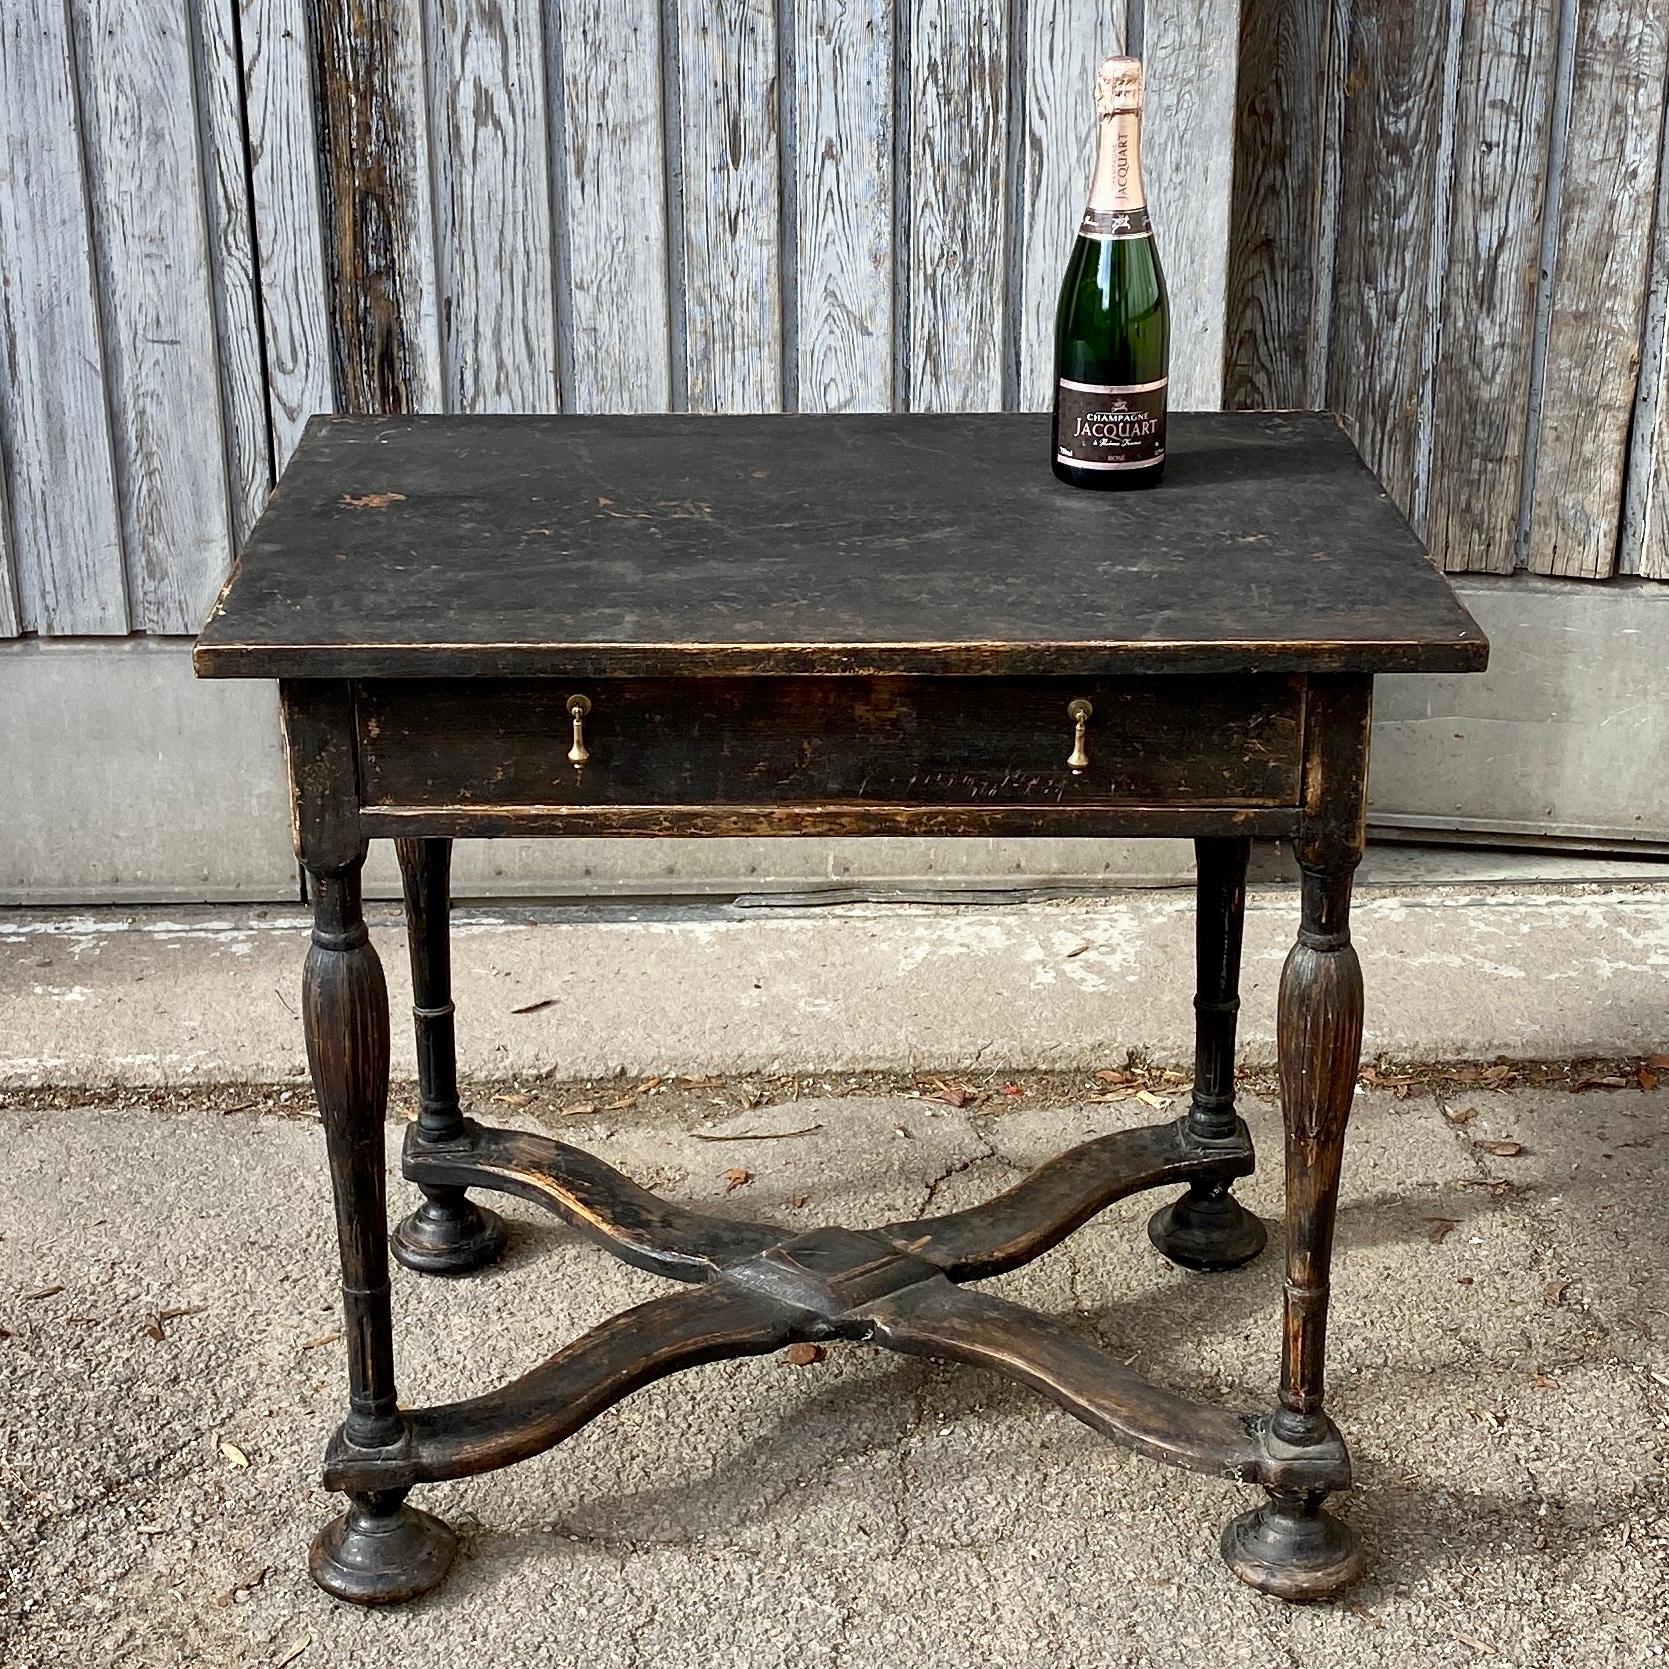 19th Century Gustavian style black painted Table. The rectangular table has 1 drawer with tear drop shaped brass hardware. This charming table would be well suited as a side table or in an entrance.